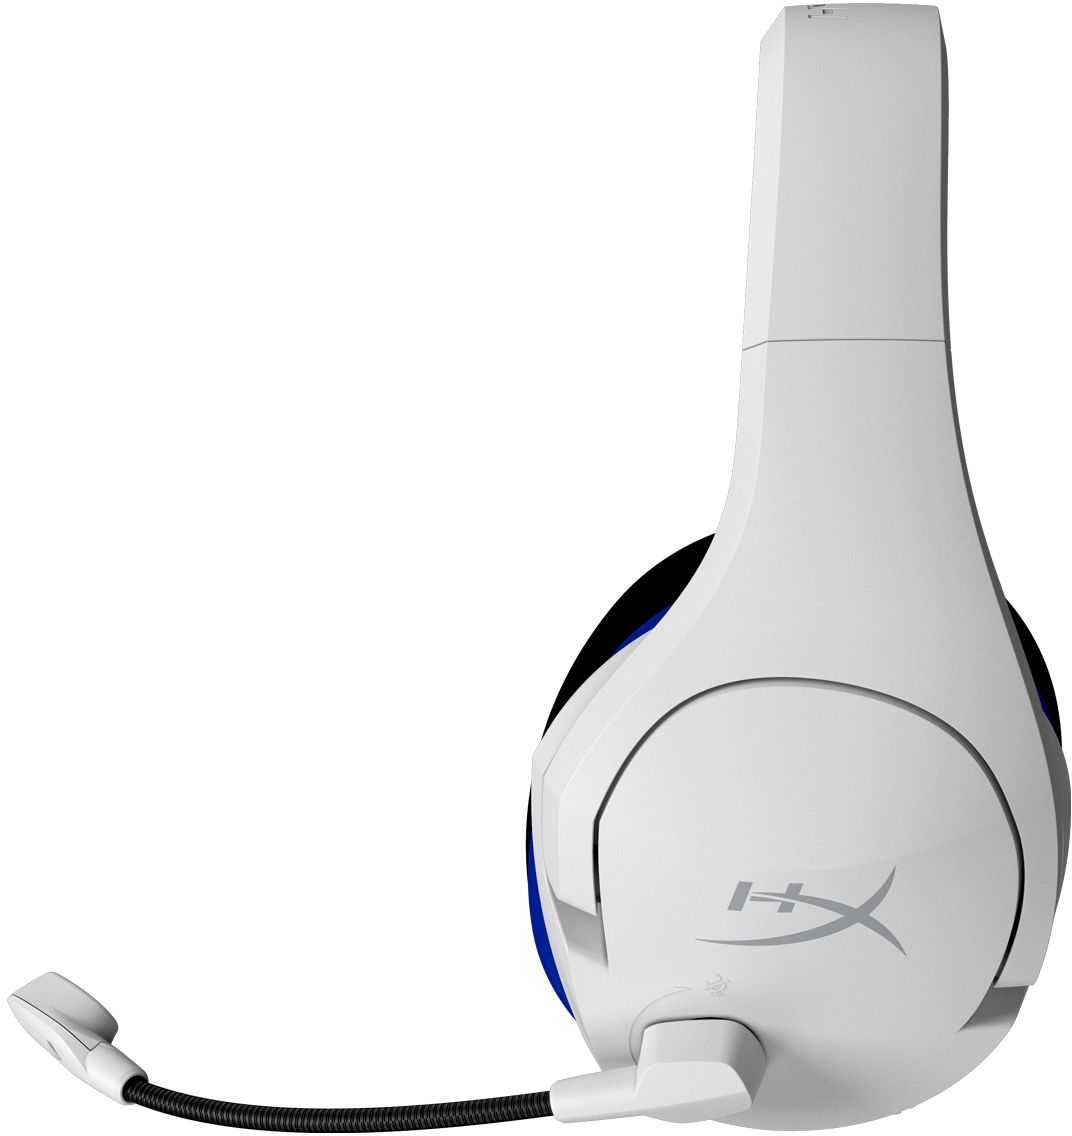 Cloud 4P5J1AA/HHSS1C-KB-WT/G PC, for Stinger Wireless PS5, PS4 and Best Buy Headset - HyperX Core White Gaming